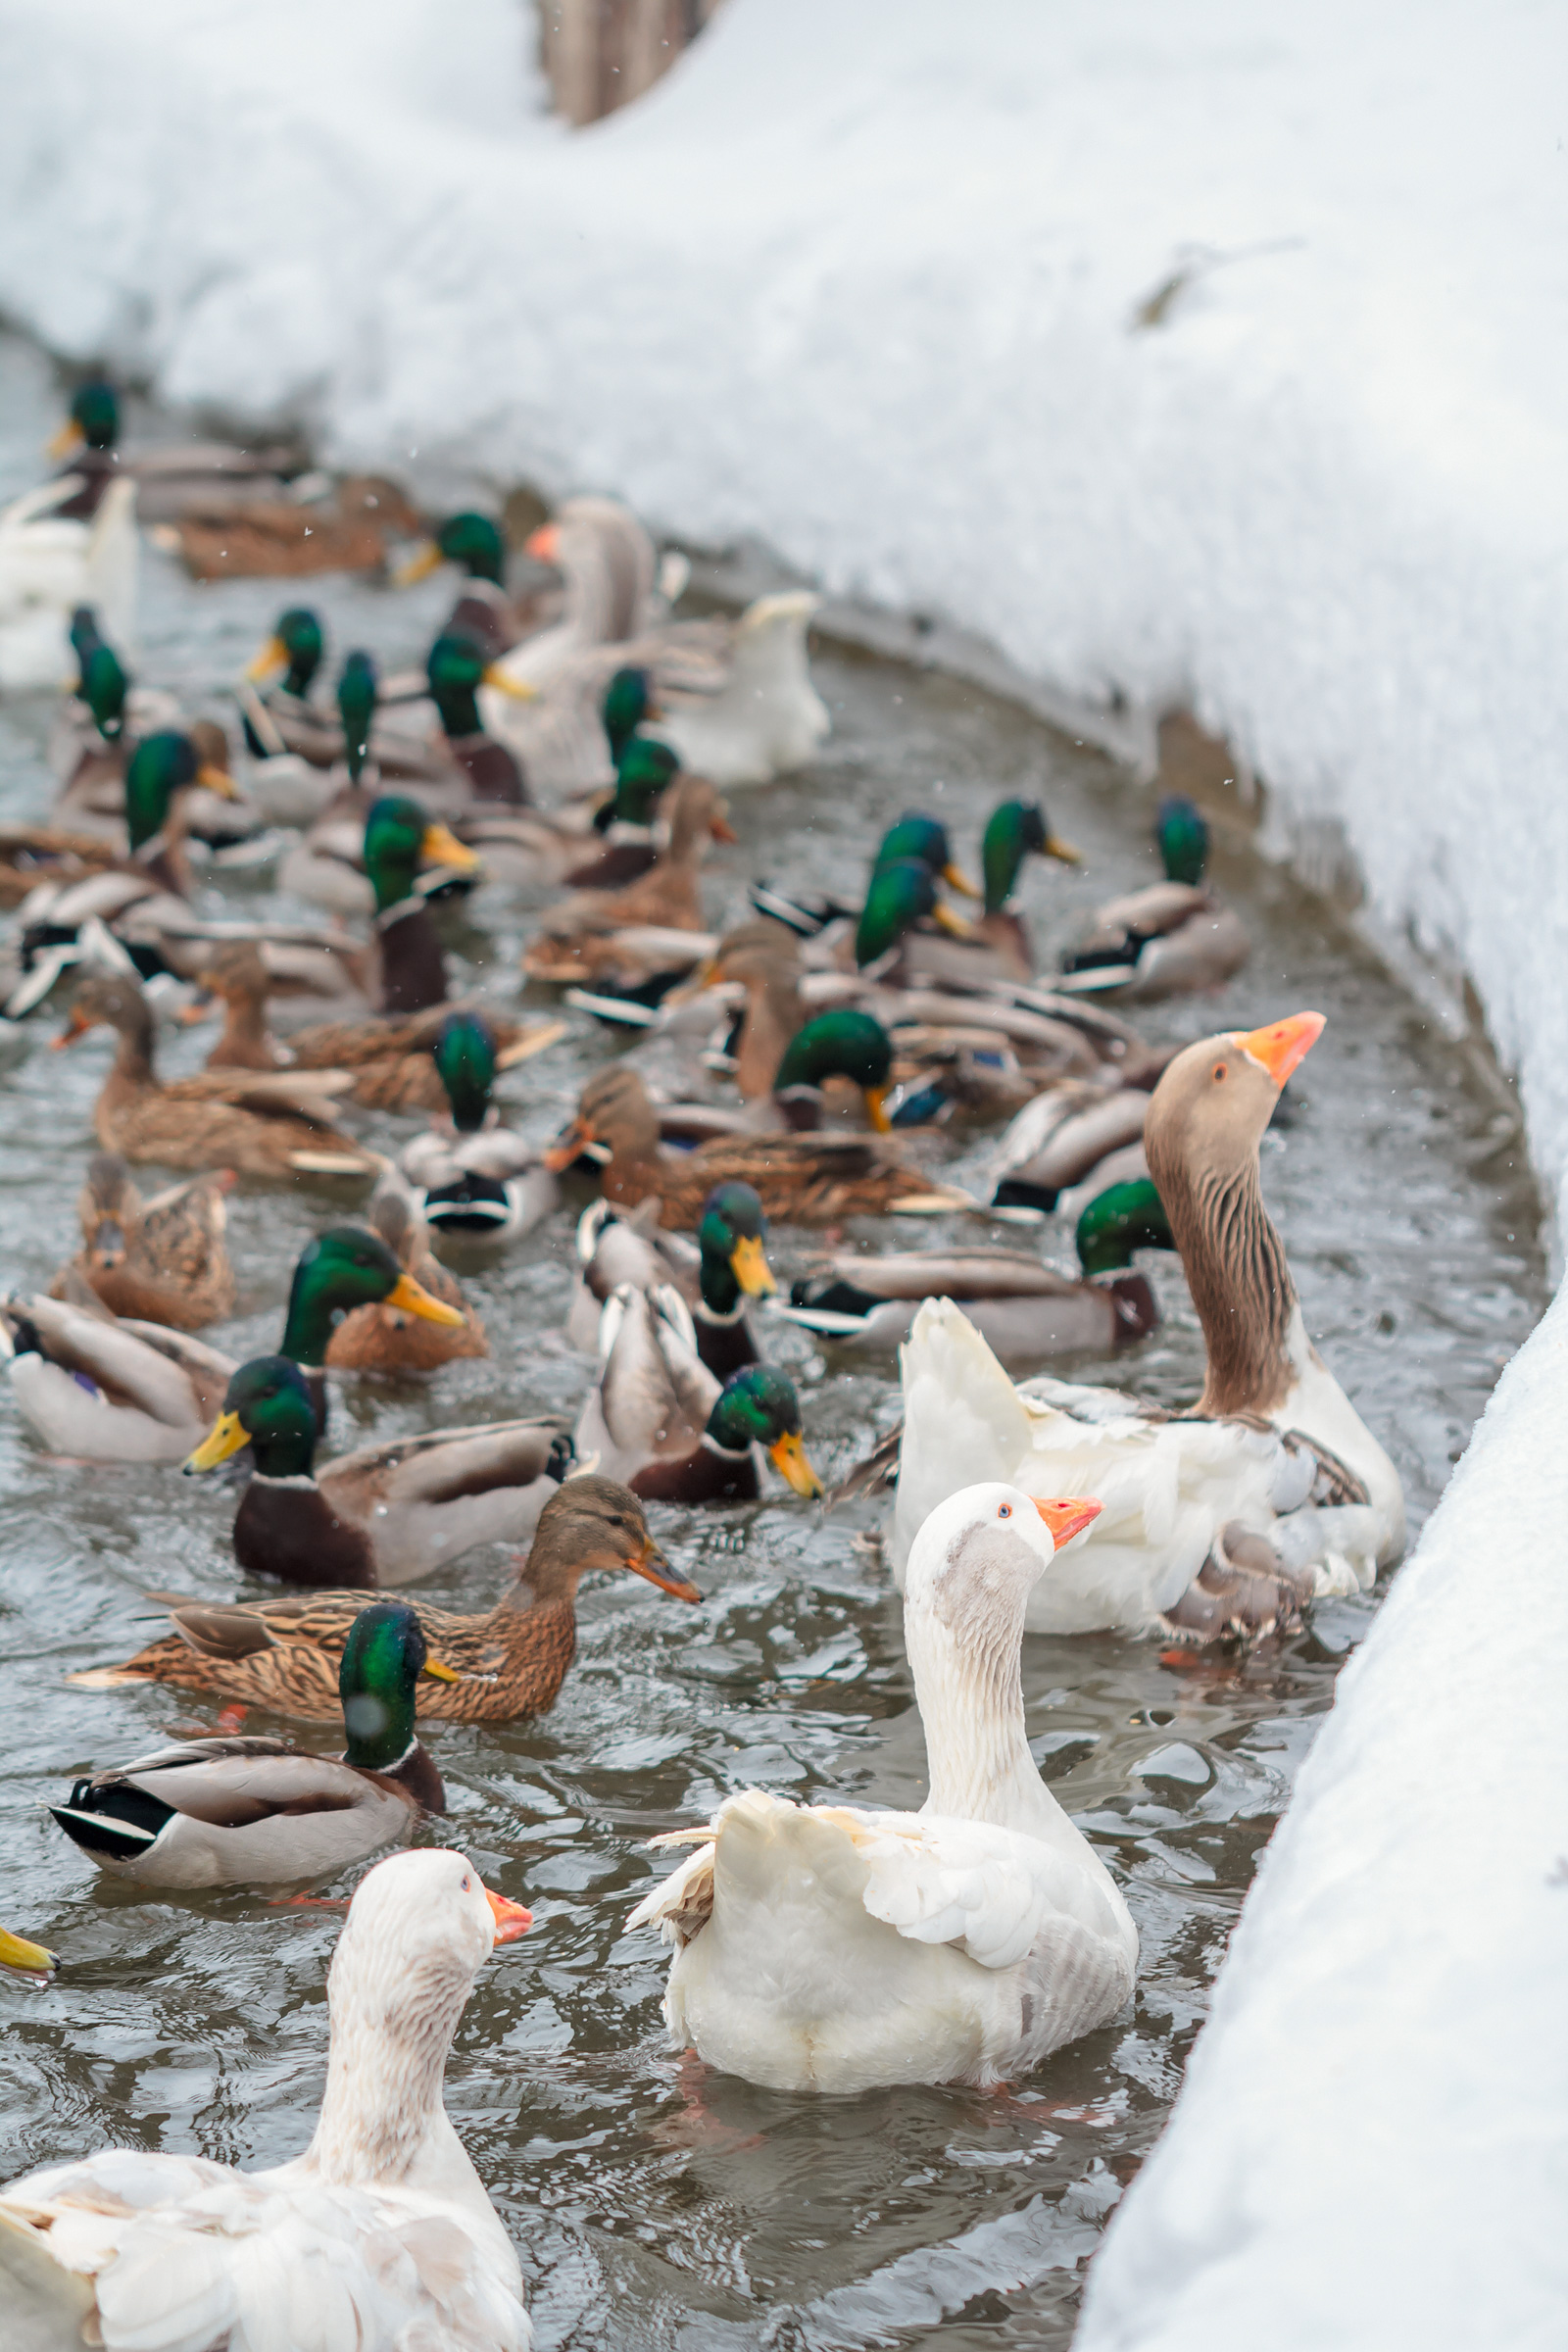 Wild ducks and domestic geese in a pond during winter